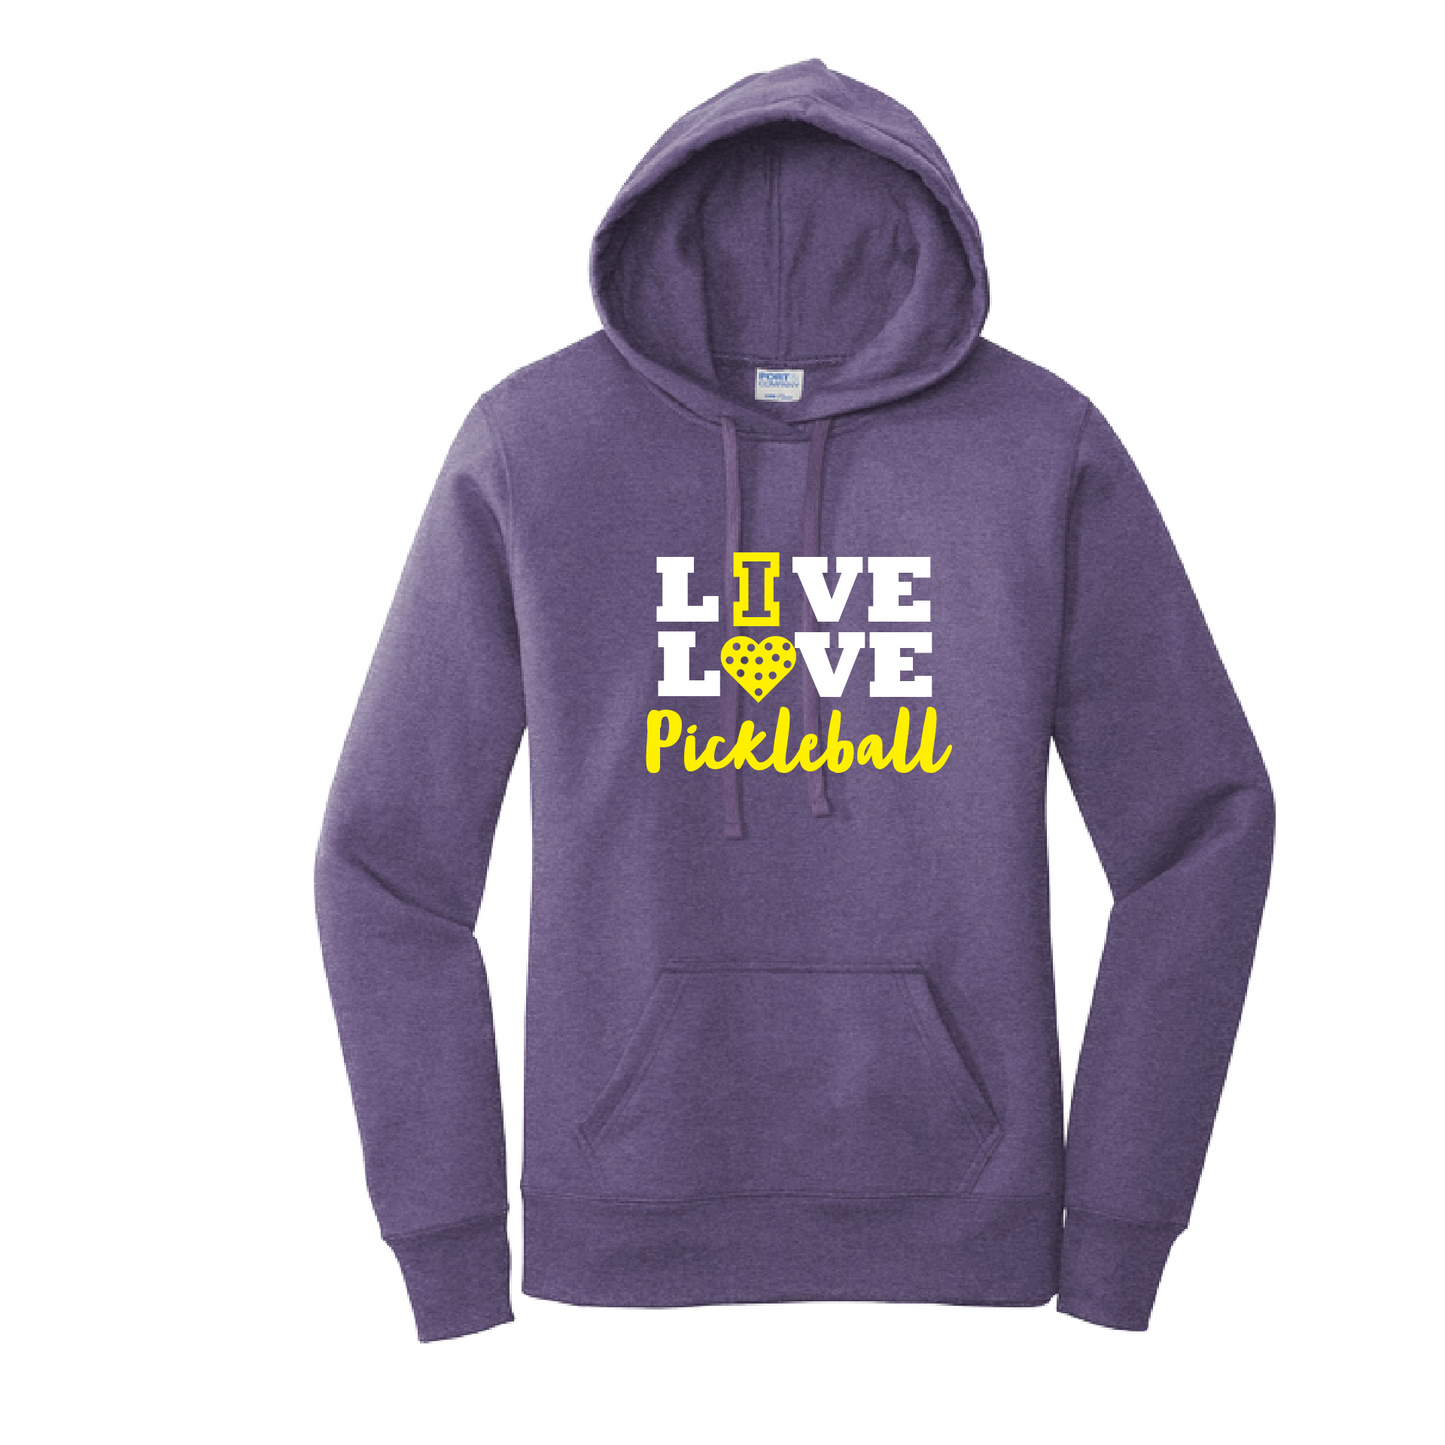 Pickleball Design: Live Love Pickleball  Women's Hooded pullover Sweatshirt  Turn up the volume in this Women's Sweatshirts with its perfect mix of softness and attitude. Ultra soft lined inside with a lined hood also. This is fitted nicely for a women's figure. Front pouch pocket.